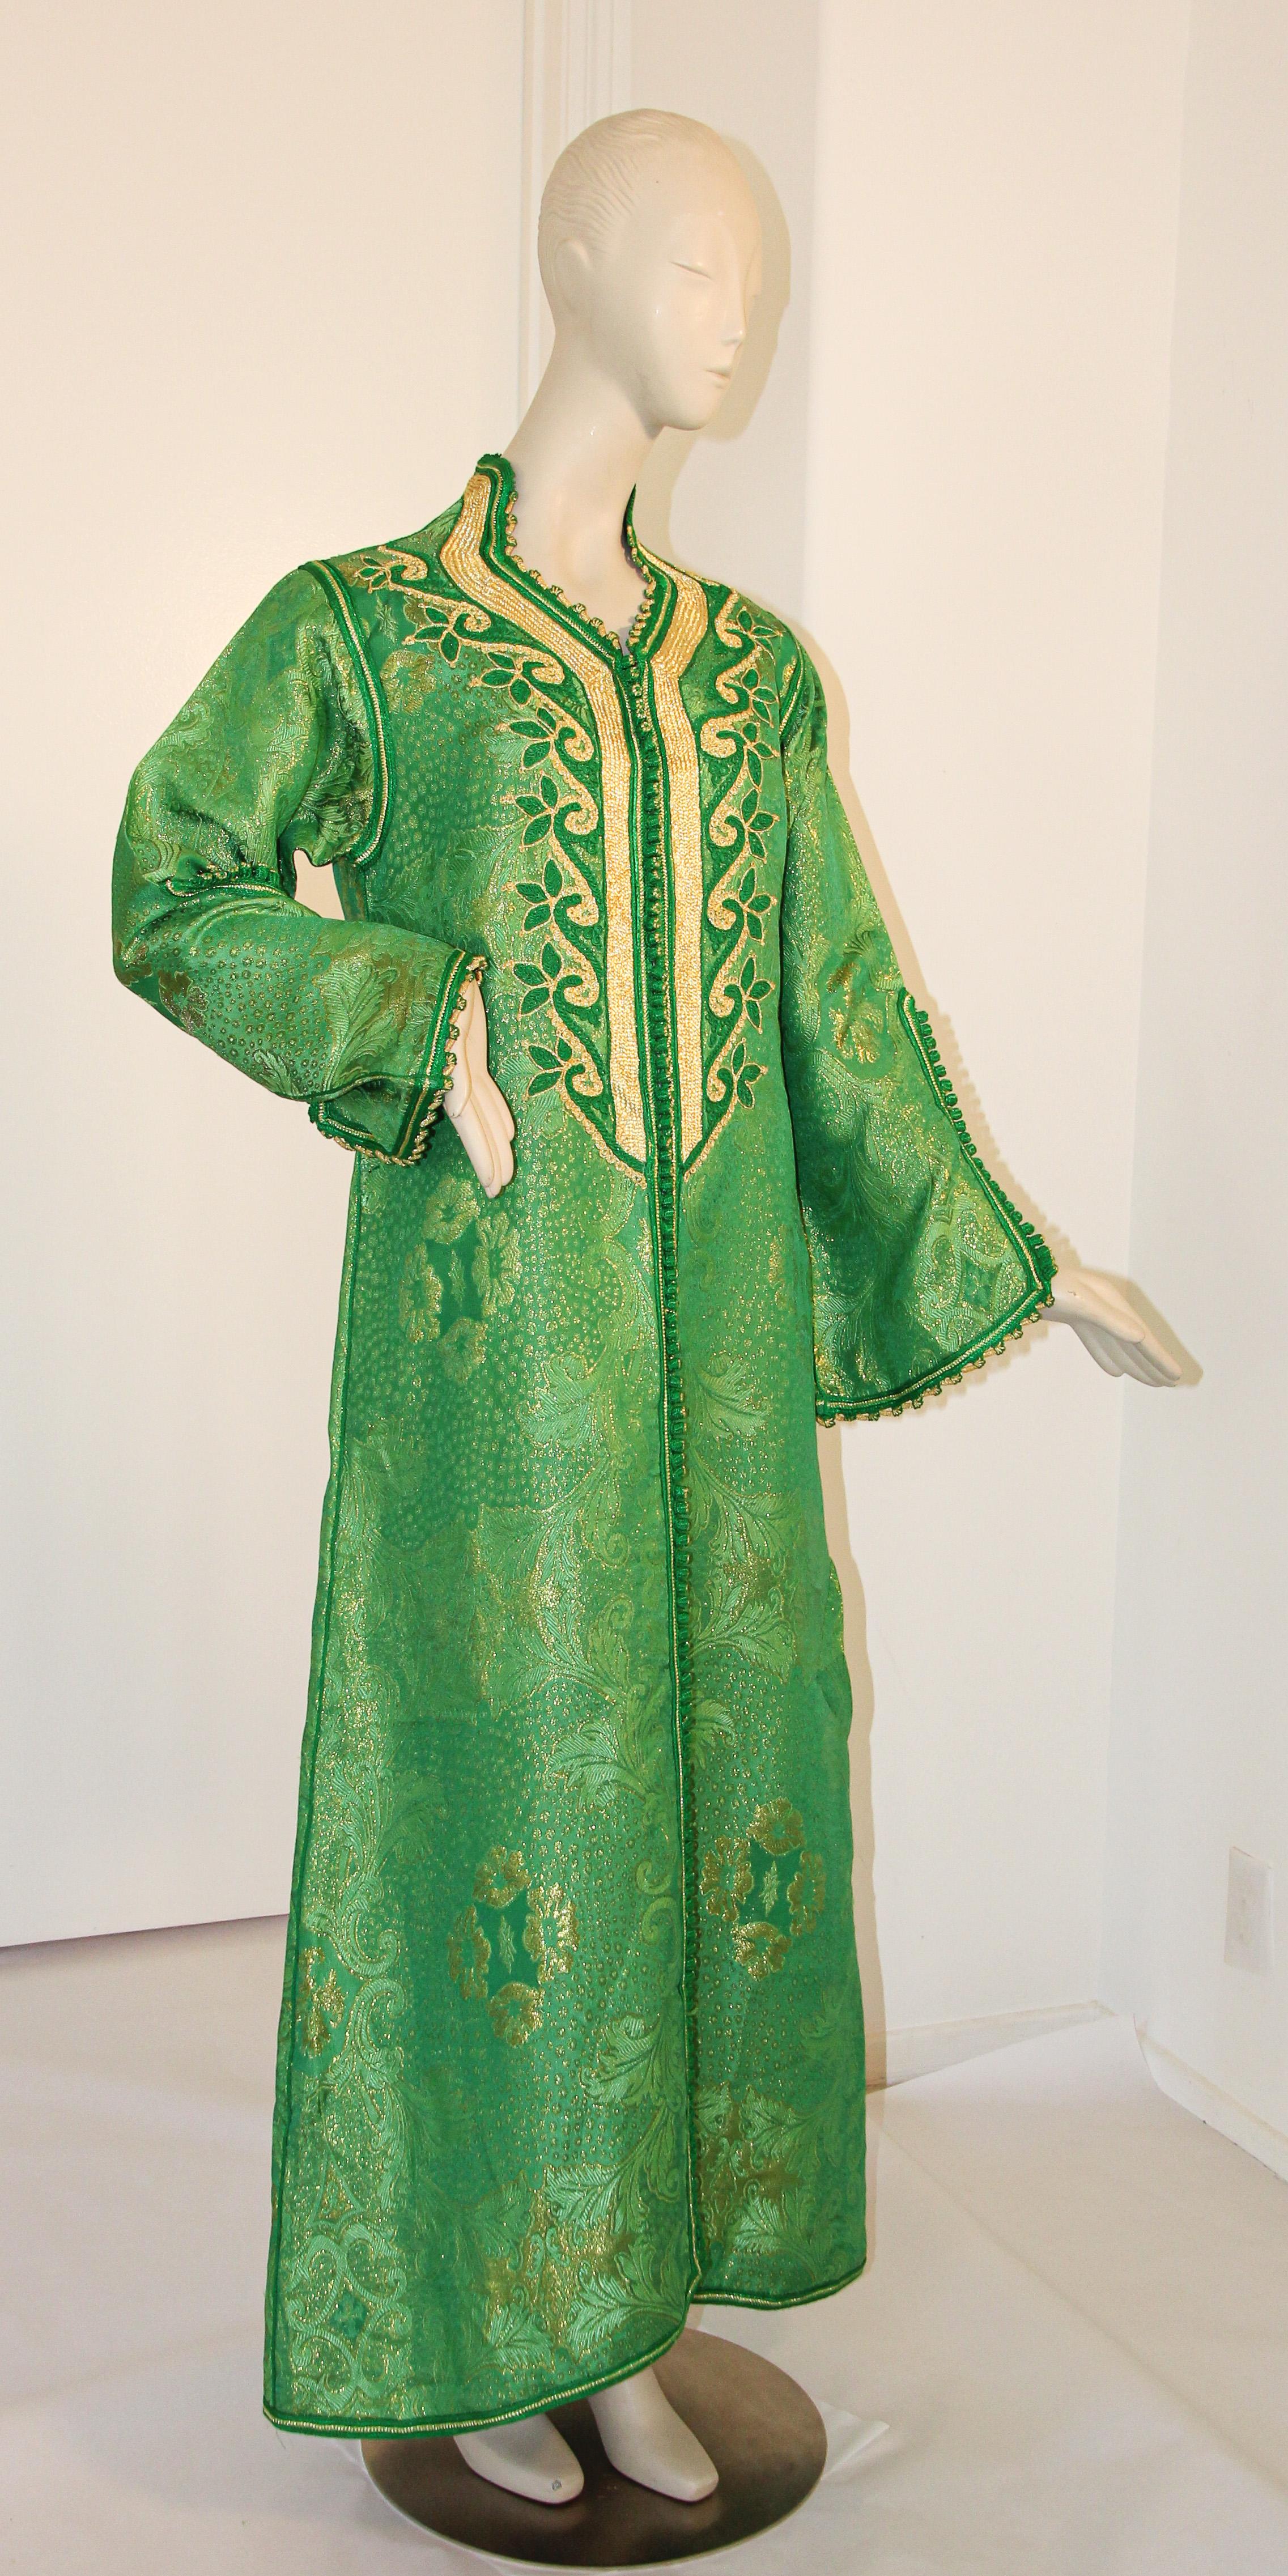 Elegant Moroccan caftan emerald green and gold lame metallic brocade,
This is an exceptional example of Moroccan fashion,
Handcrafted in Morocco and tailored for a relaxed fit with wide sleeves, it is made in the traditional form of a Moroccan